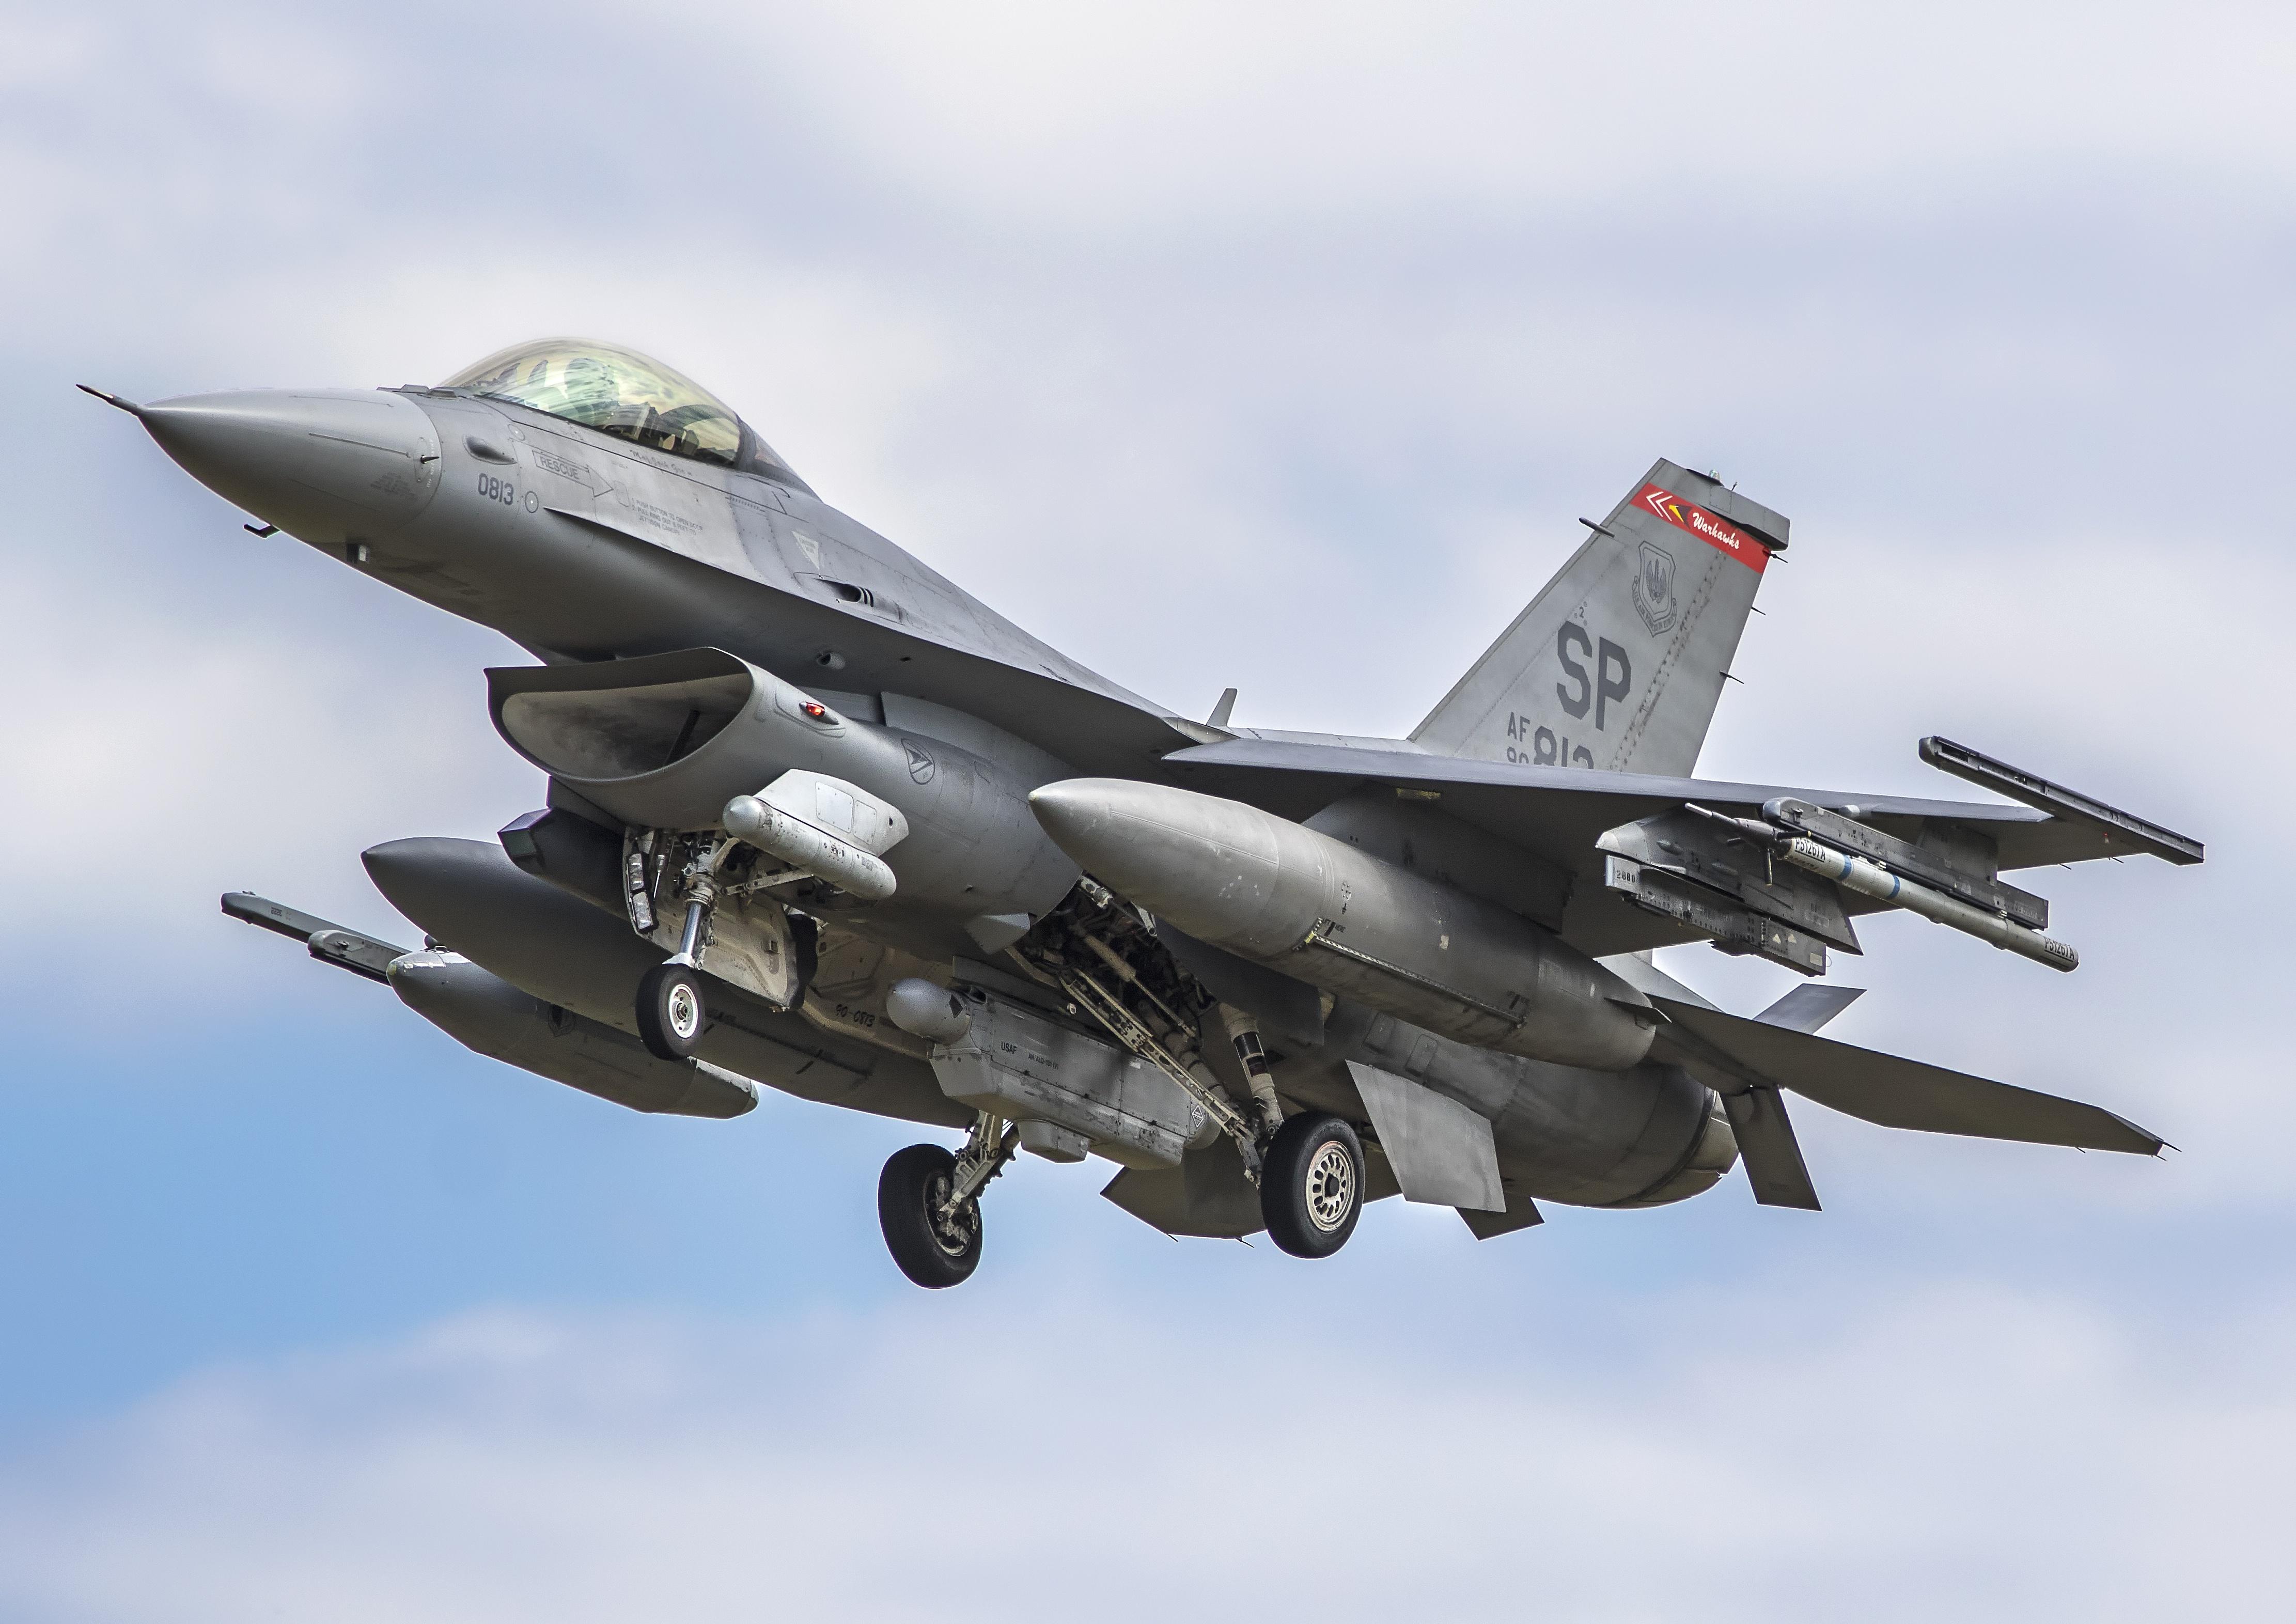 Wallpaper General Dynamics F 16 Fighting Falcon, Air Superiority